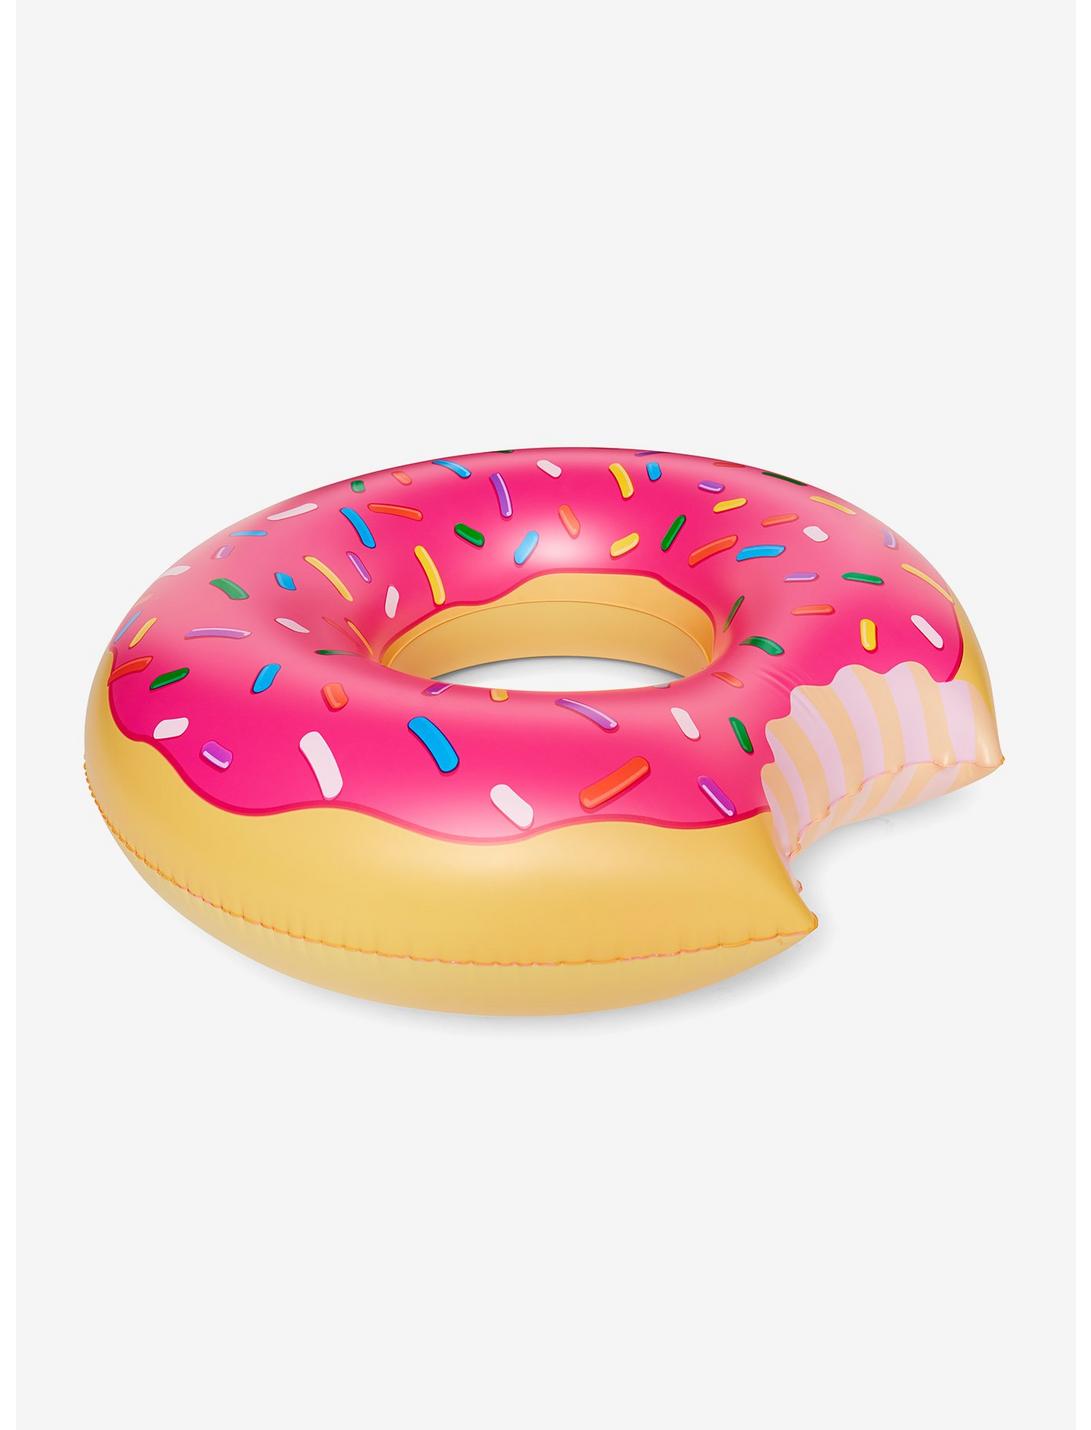 Giant Pink Frosted Donut Pool Float, , hi-res